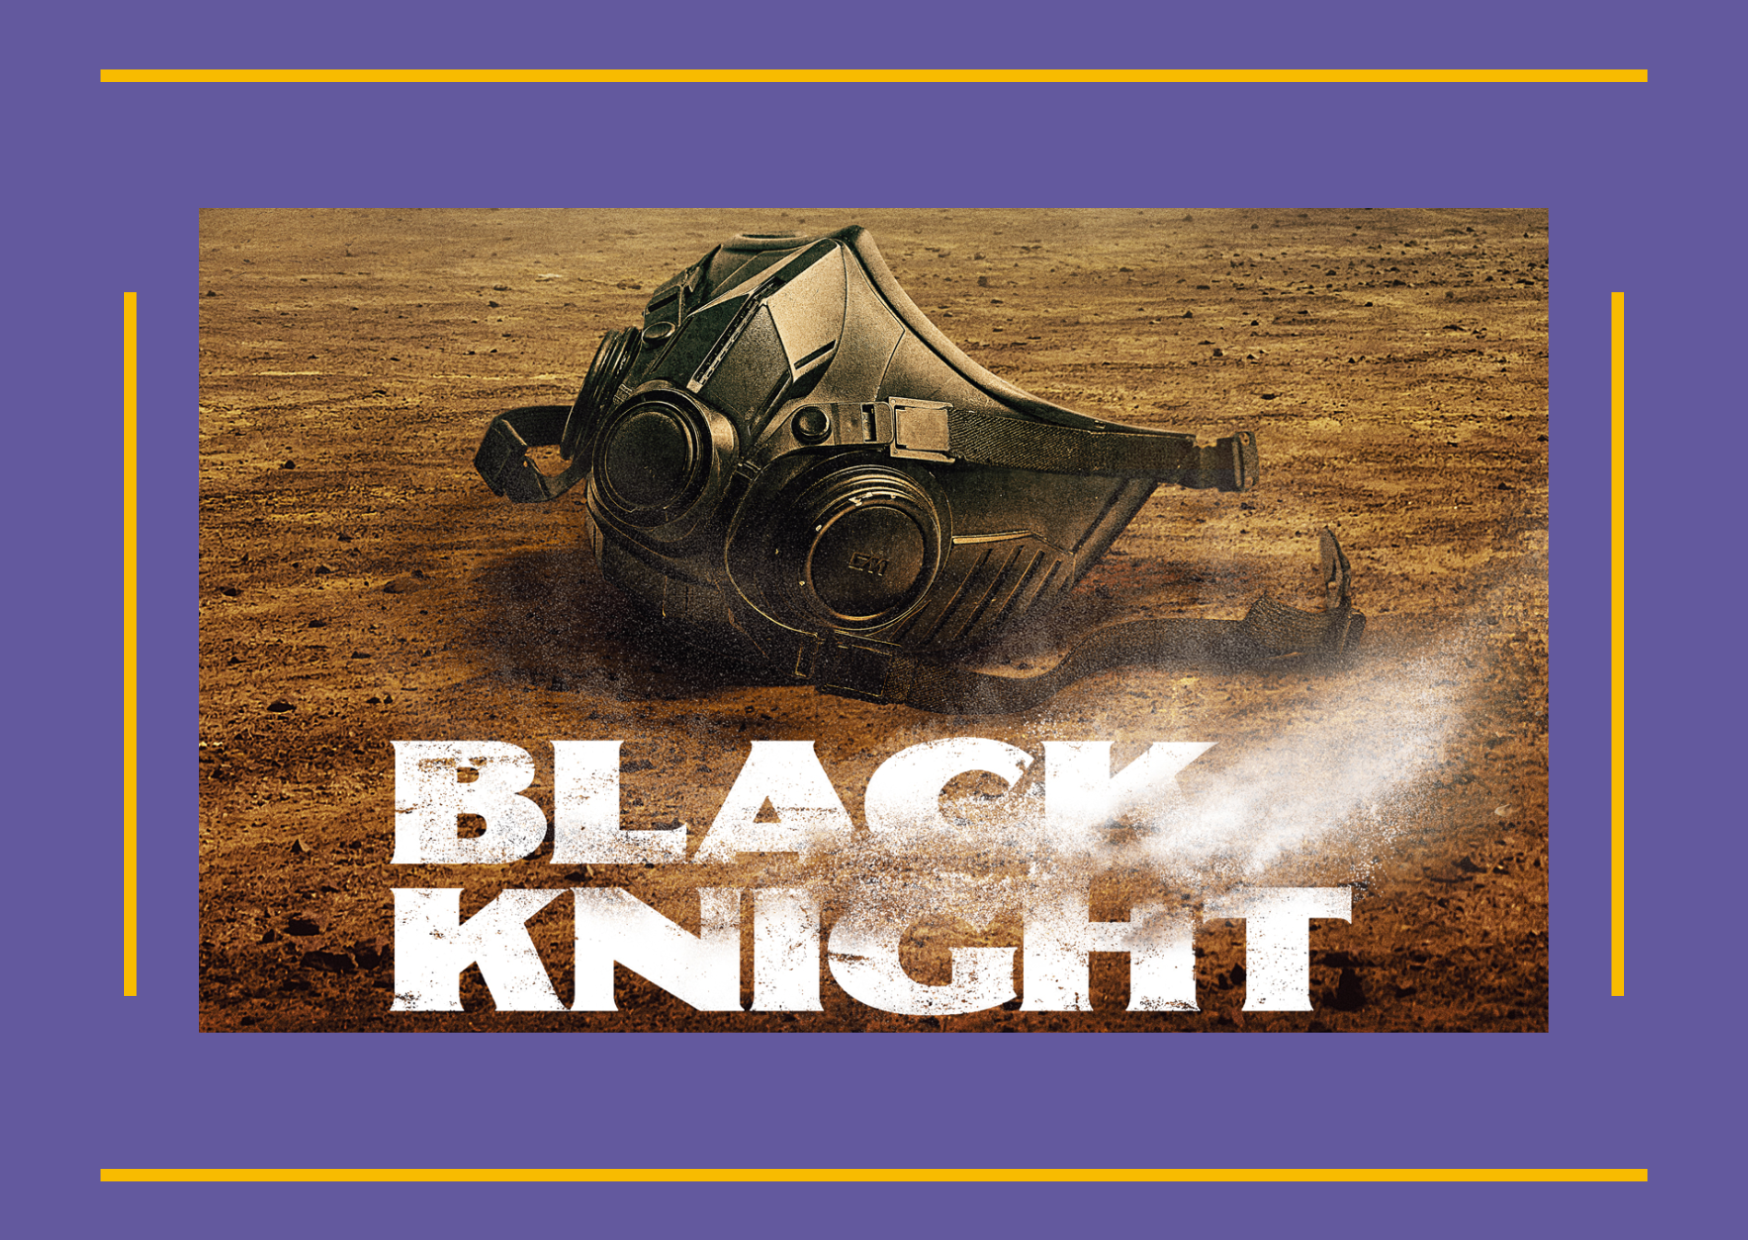 The 'Black Knight' is the savior for the remaining 1% of humanity.